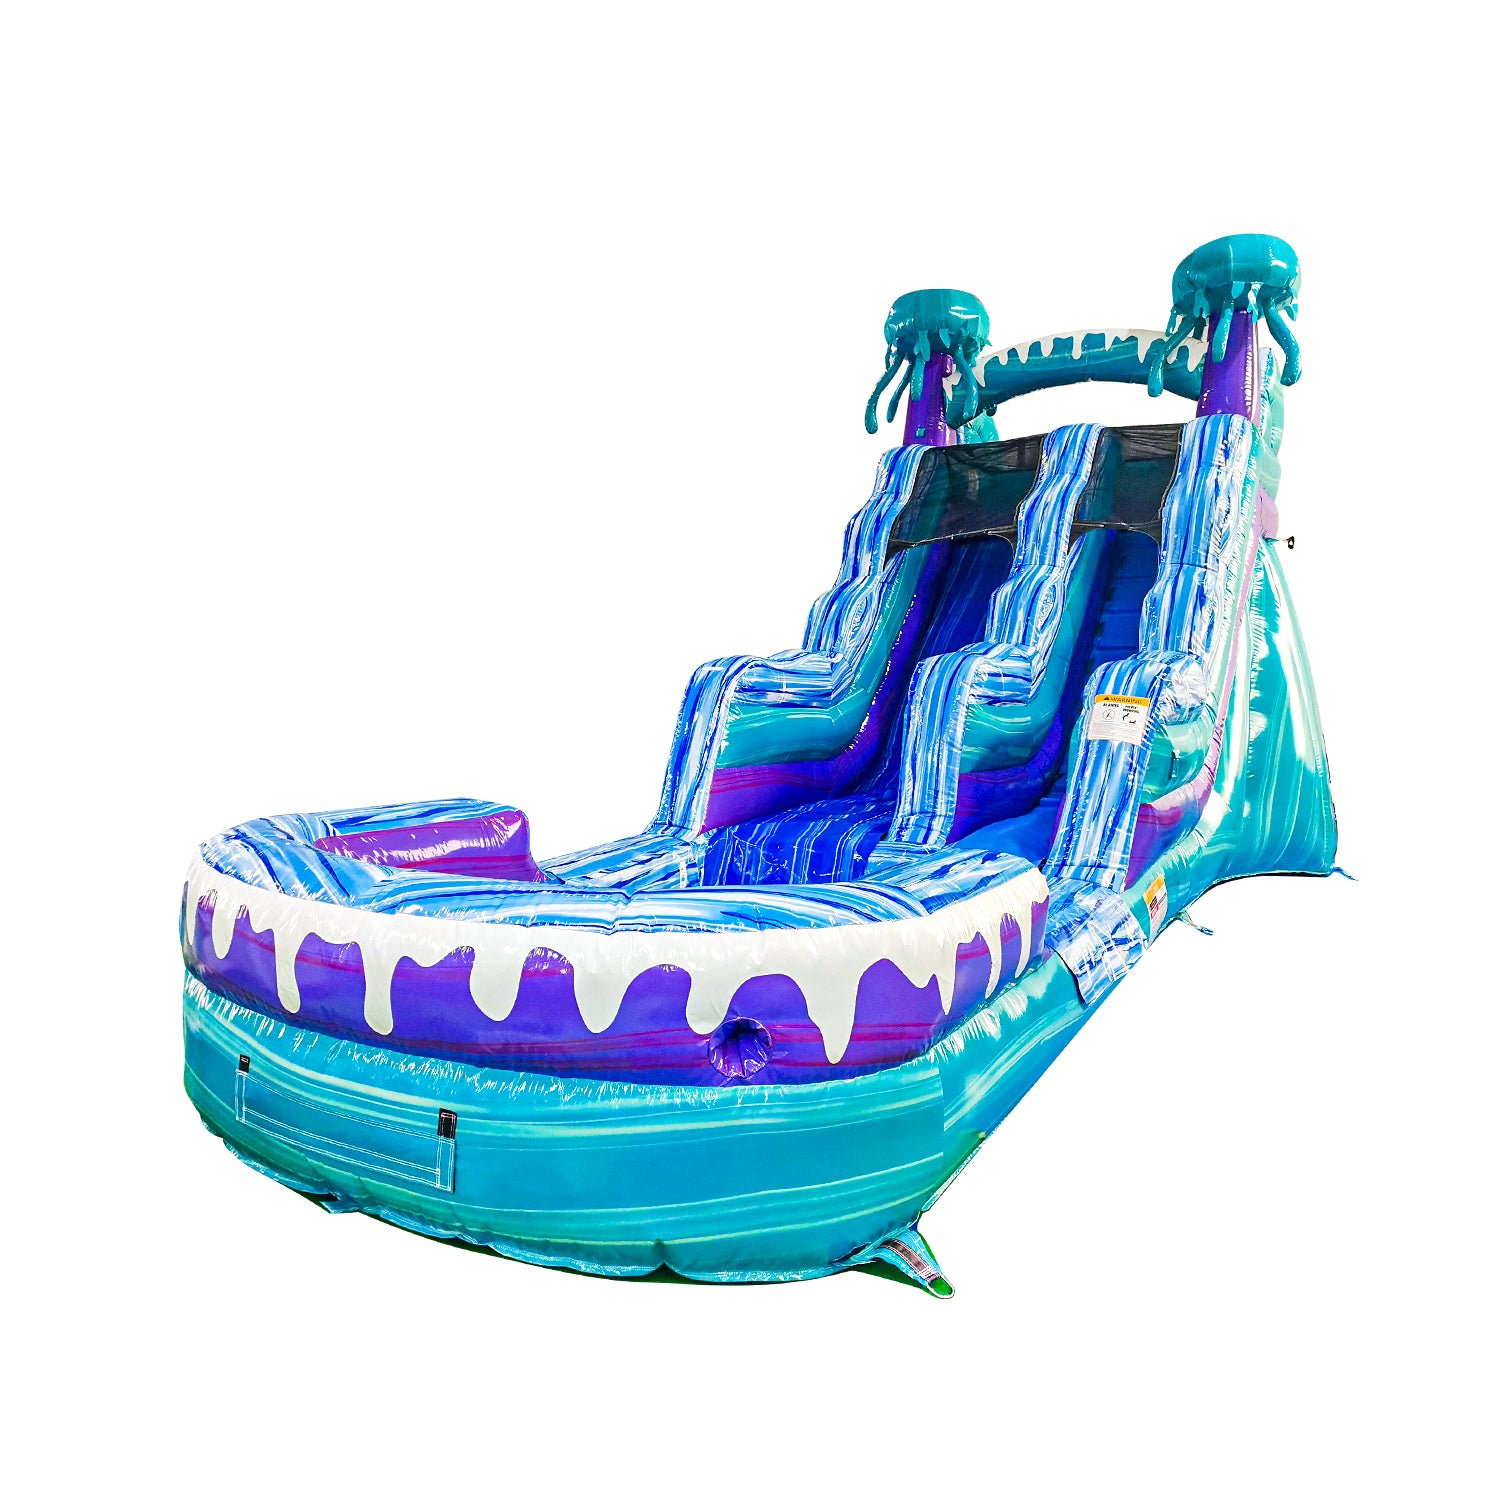 ELECTRIC 15 FT SLIDE - LIMITED EDITION